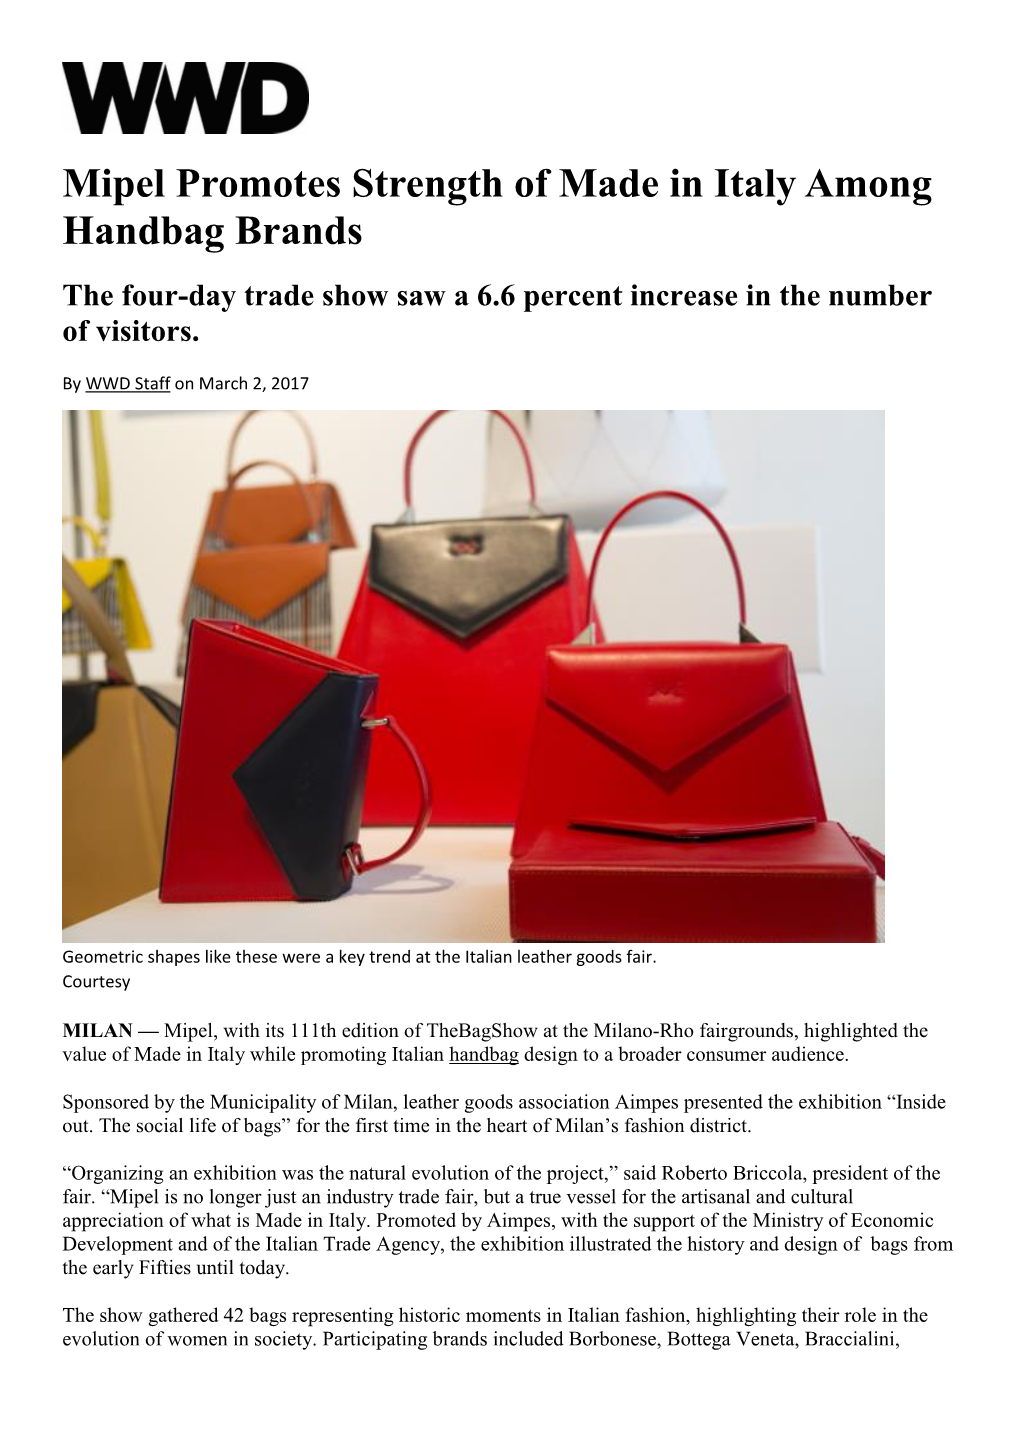 Mipel Promotes Strength of Made in Italy Among Handbag Brands the Four-Day Trade Show Saw a 6.6 Percent Increase in the Number of Visitors